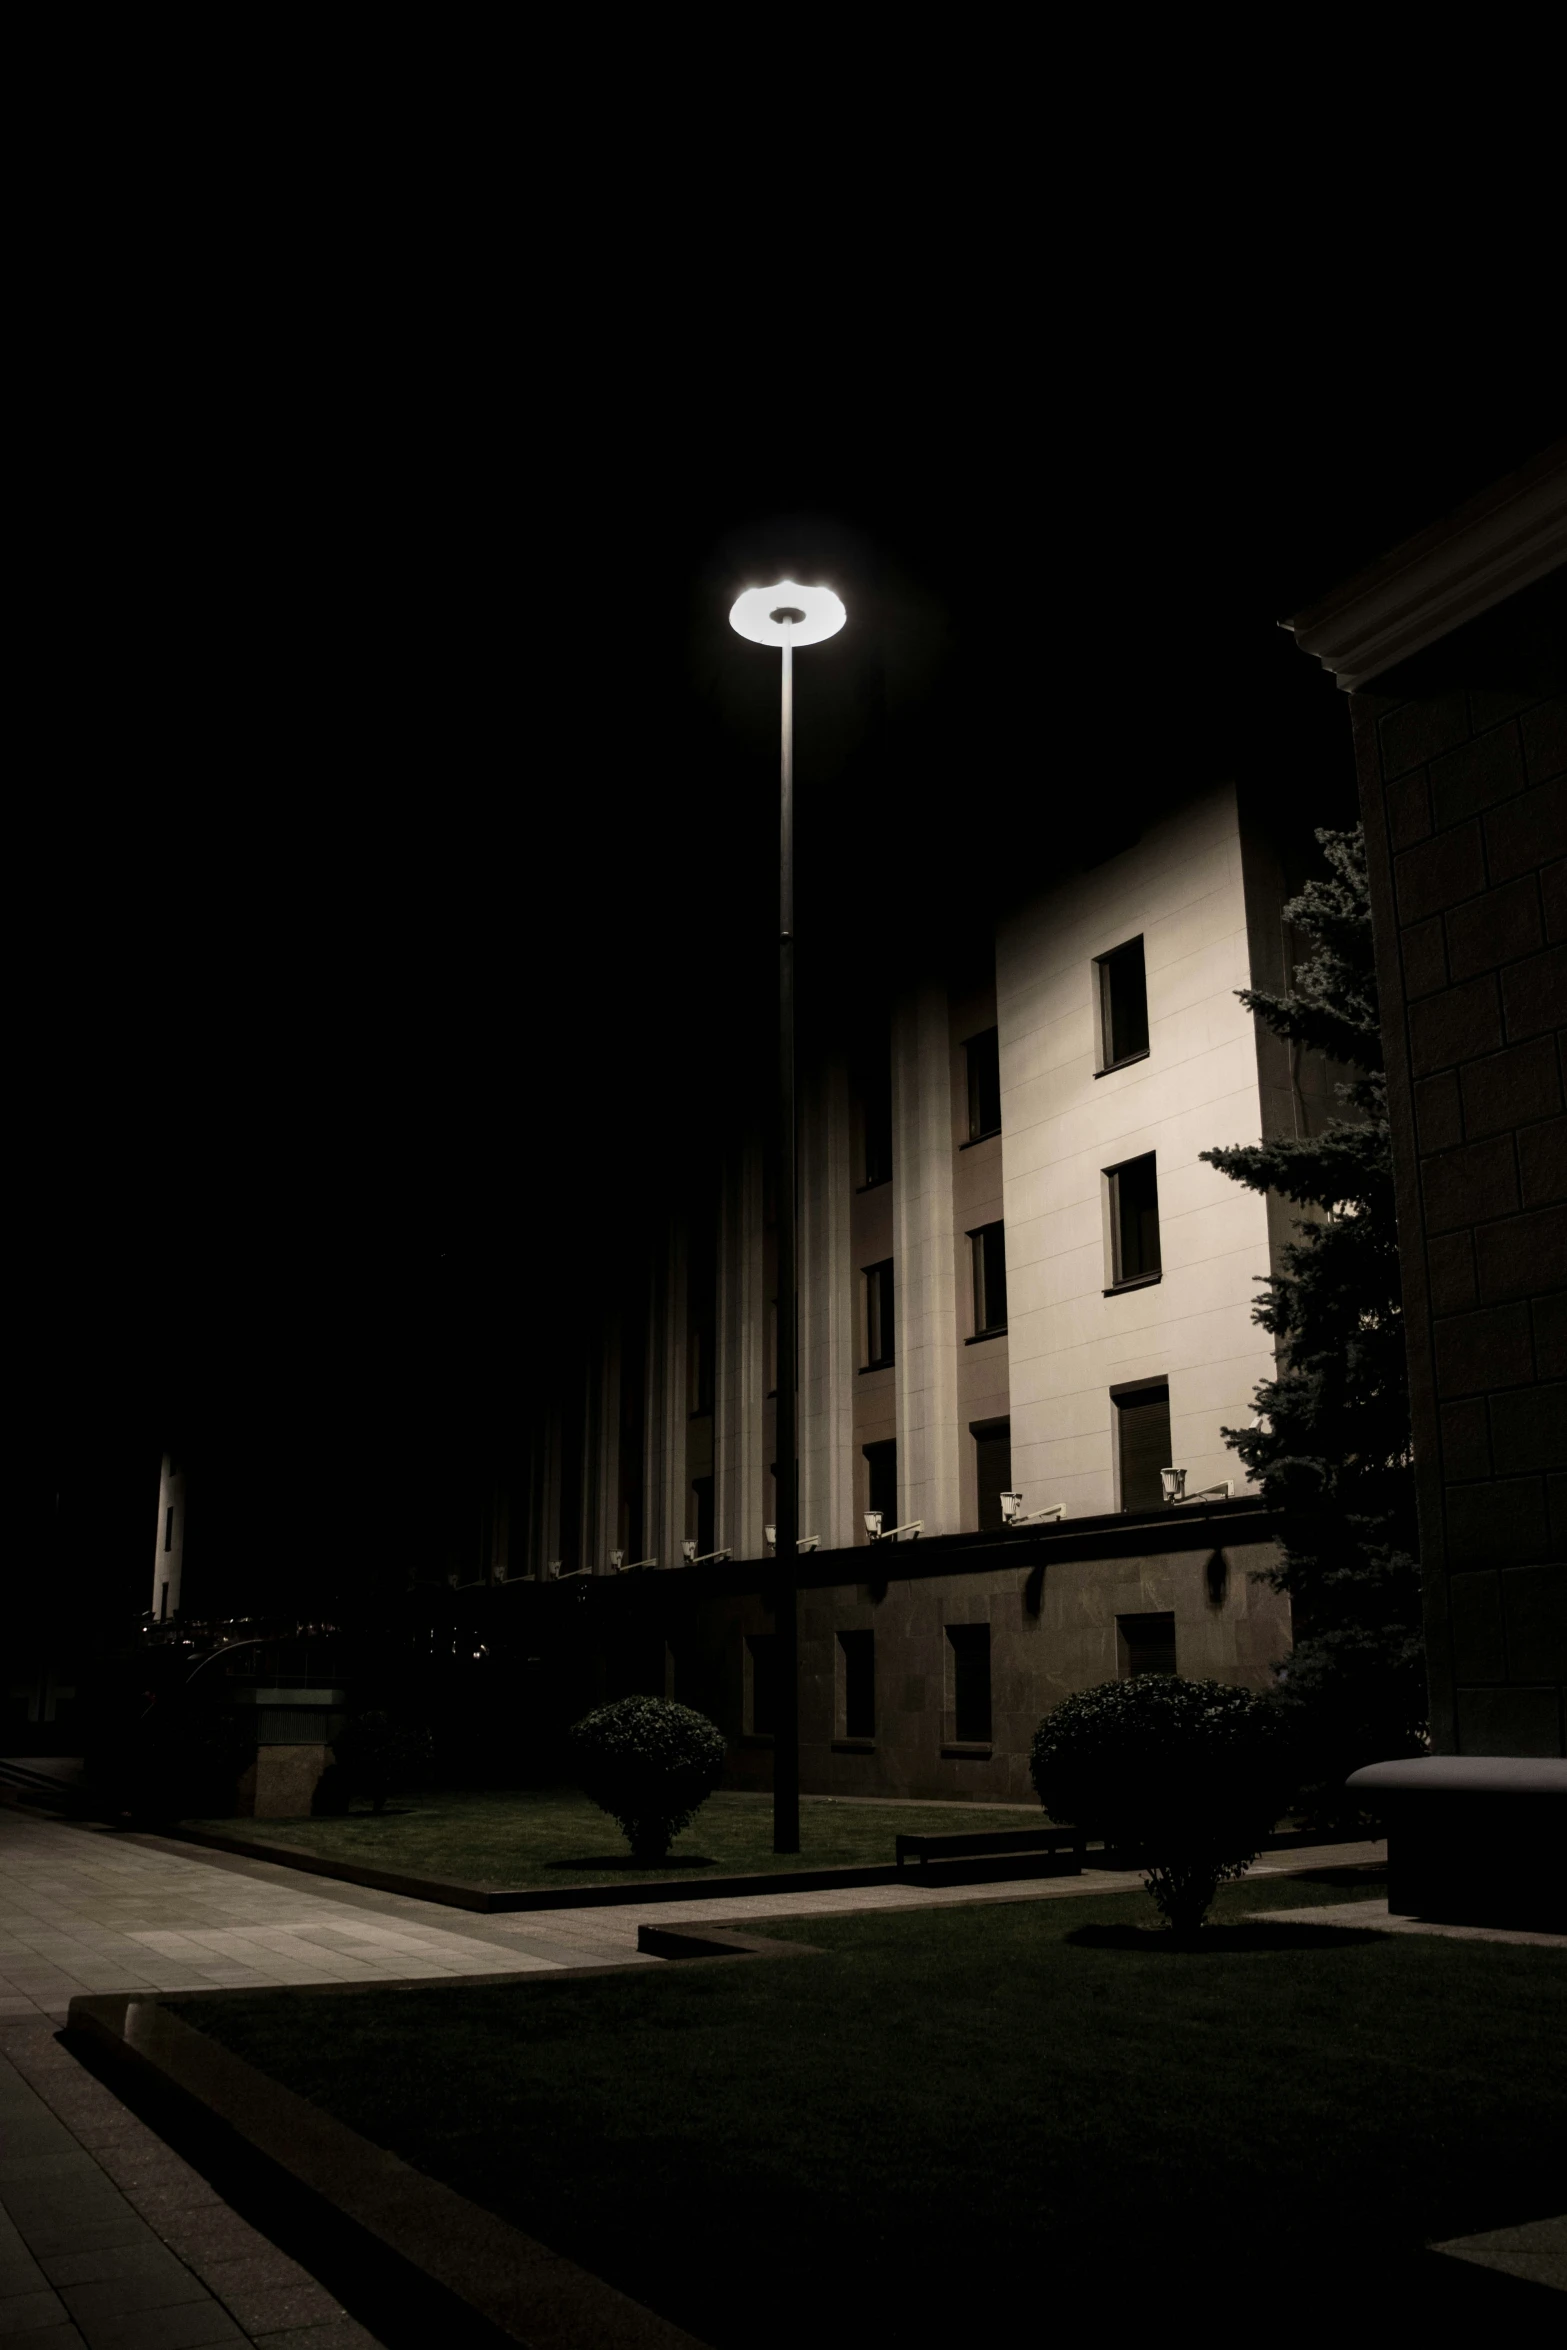 night time scene of an outside city building